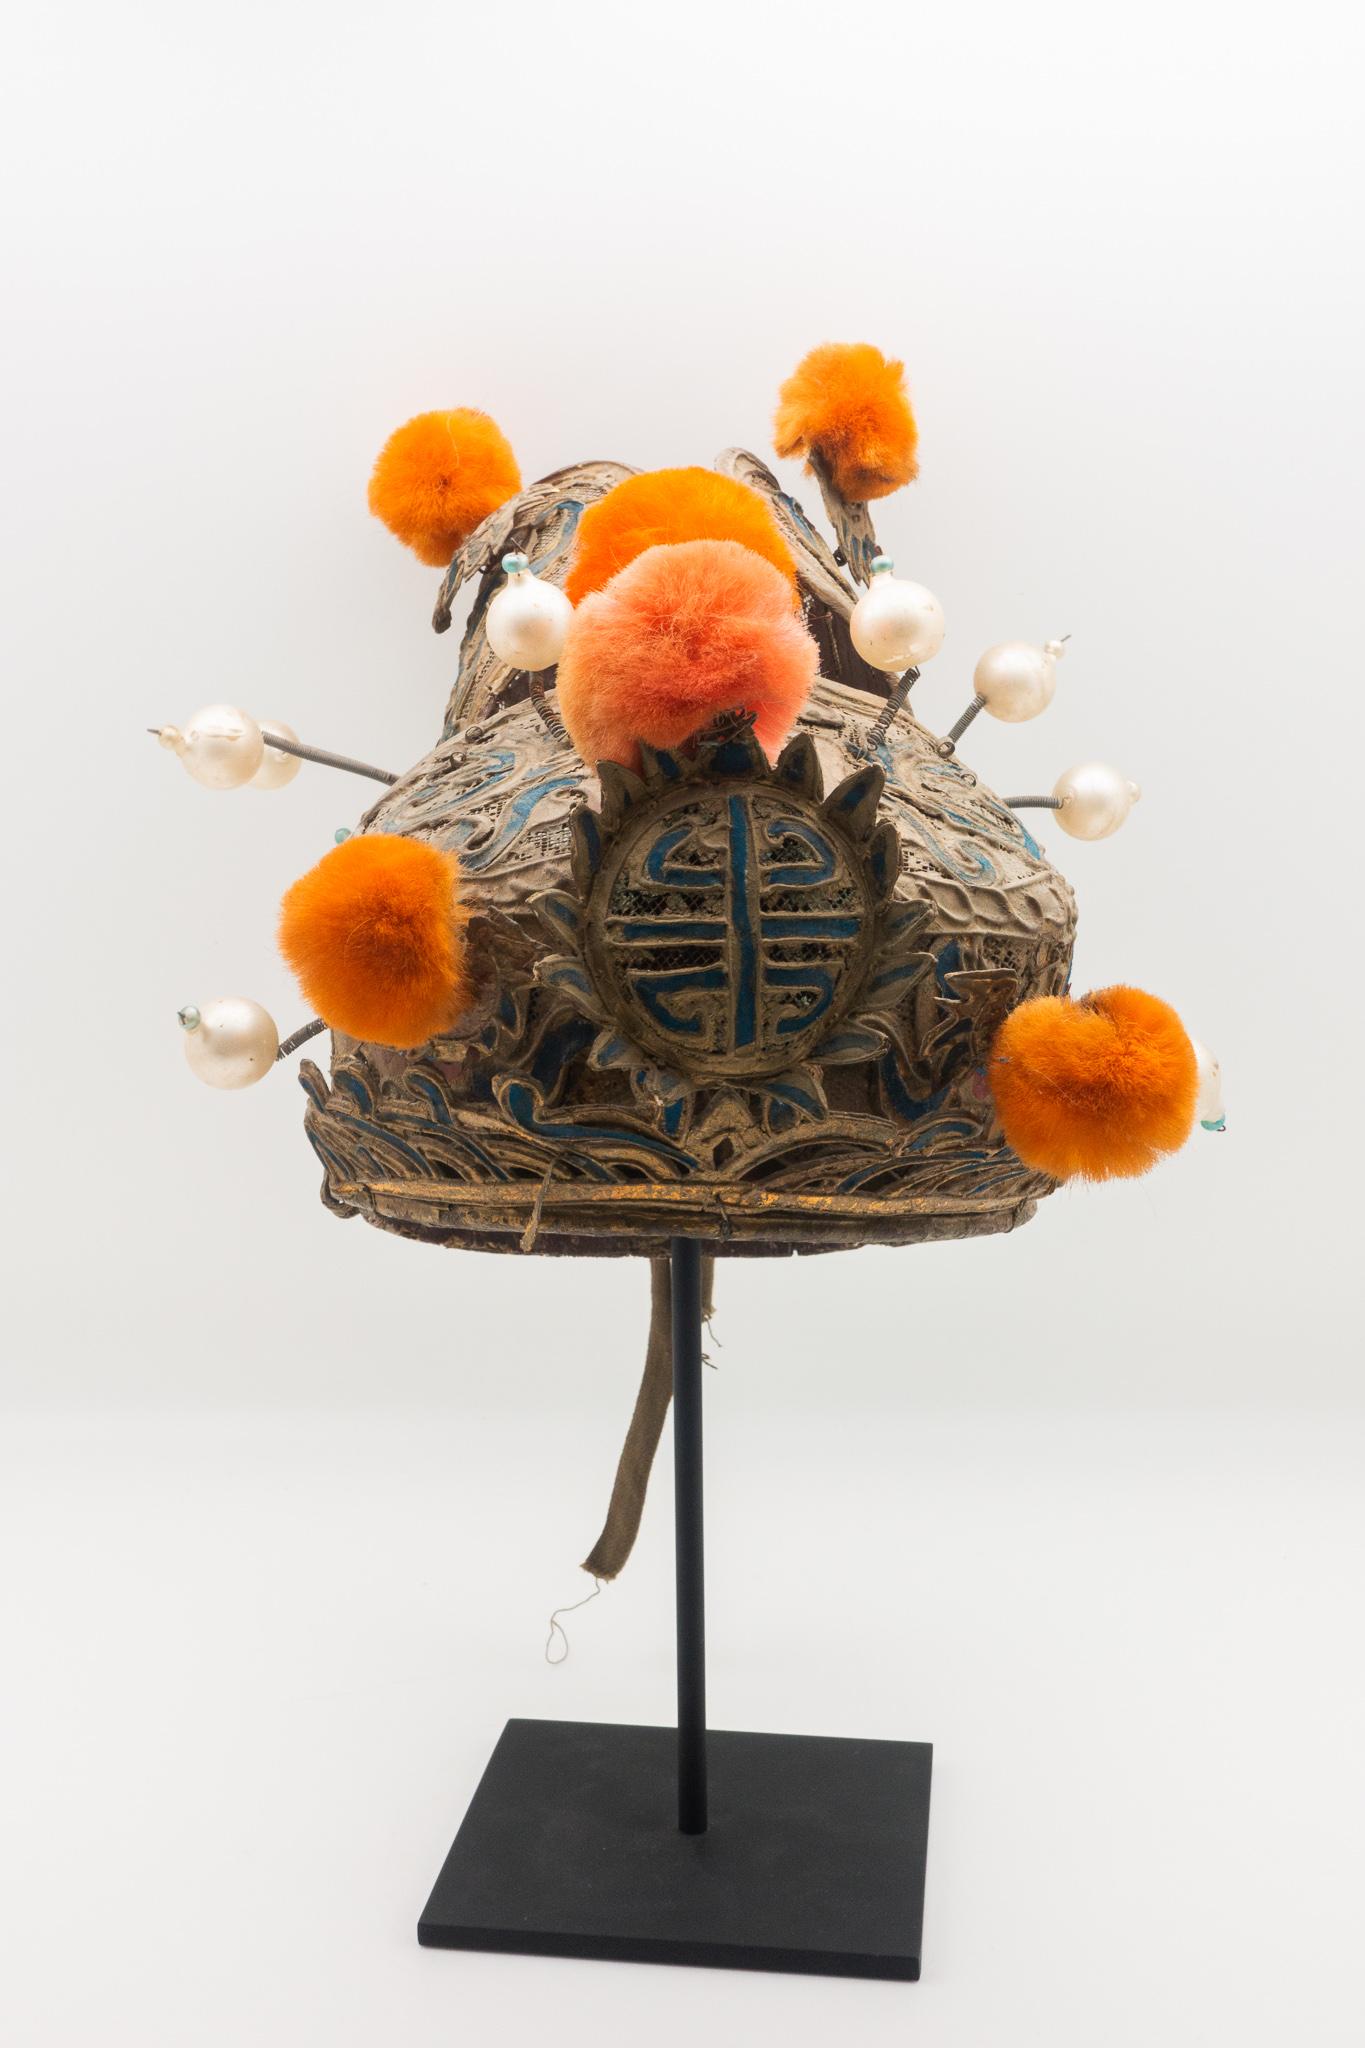 Vintage Chinese opera theatre headdress in turquoise and gold colors with orange pom poms.
Early 20th century, mounted on a custom, black painted metal base.